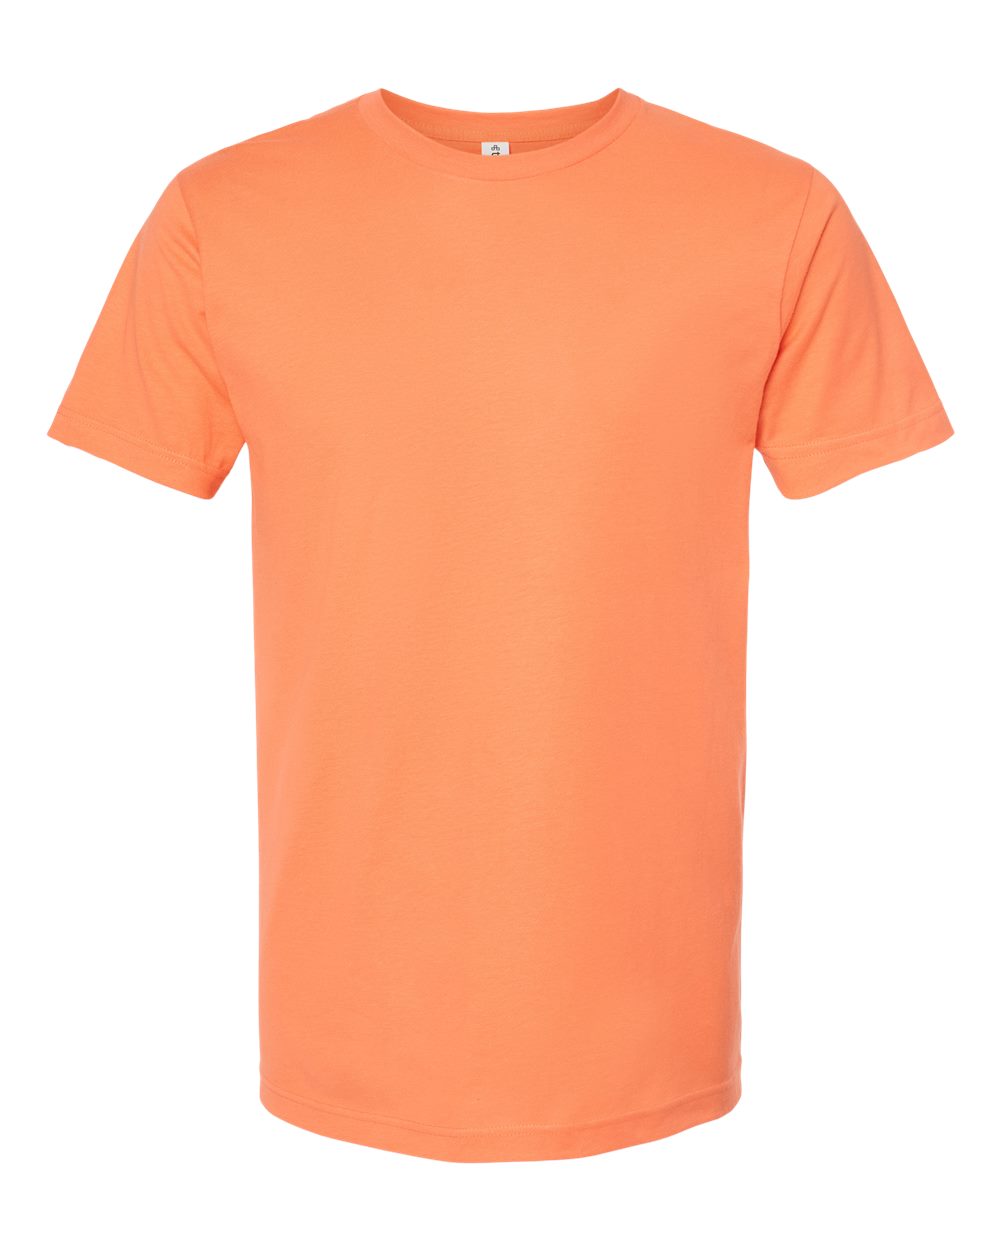 Pretreated Tultex 202 Unisex Fine Jersey T-Shirt - Coral